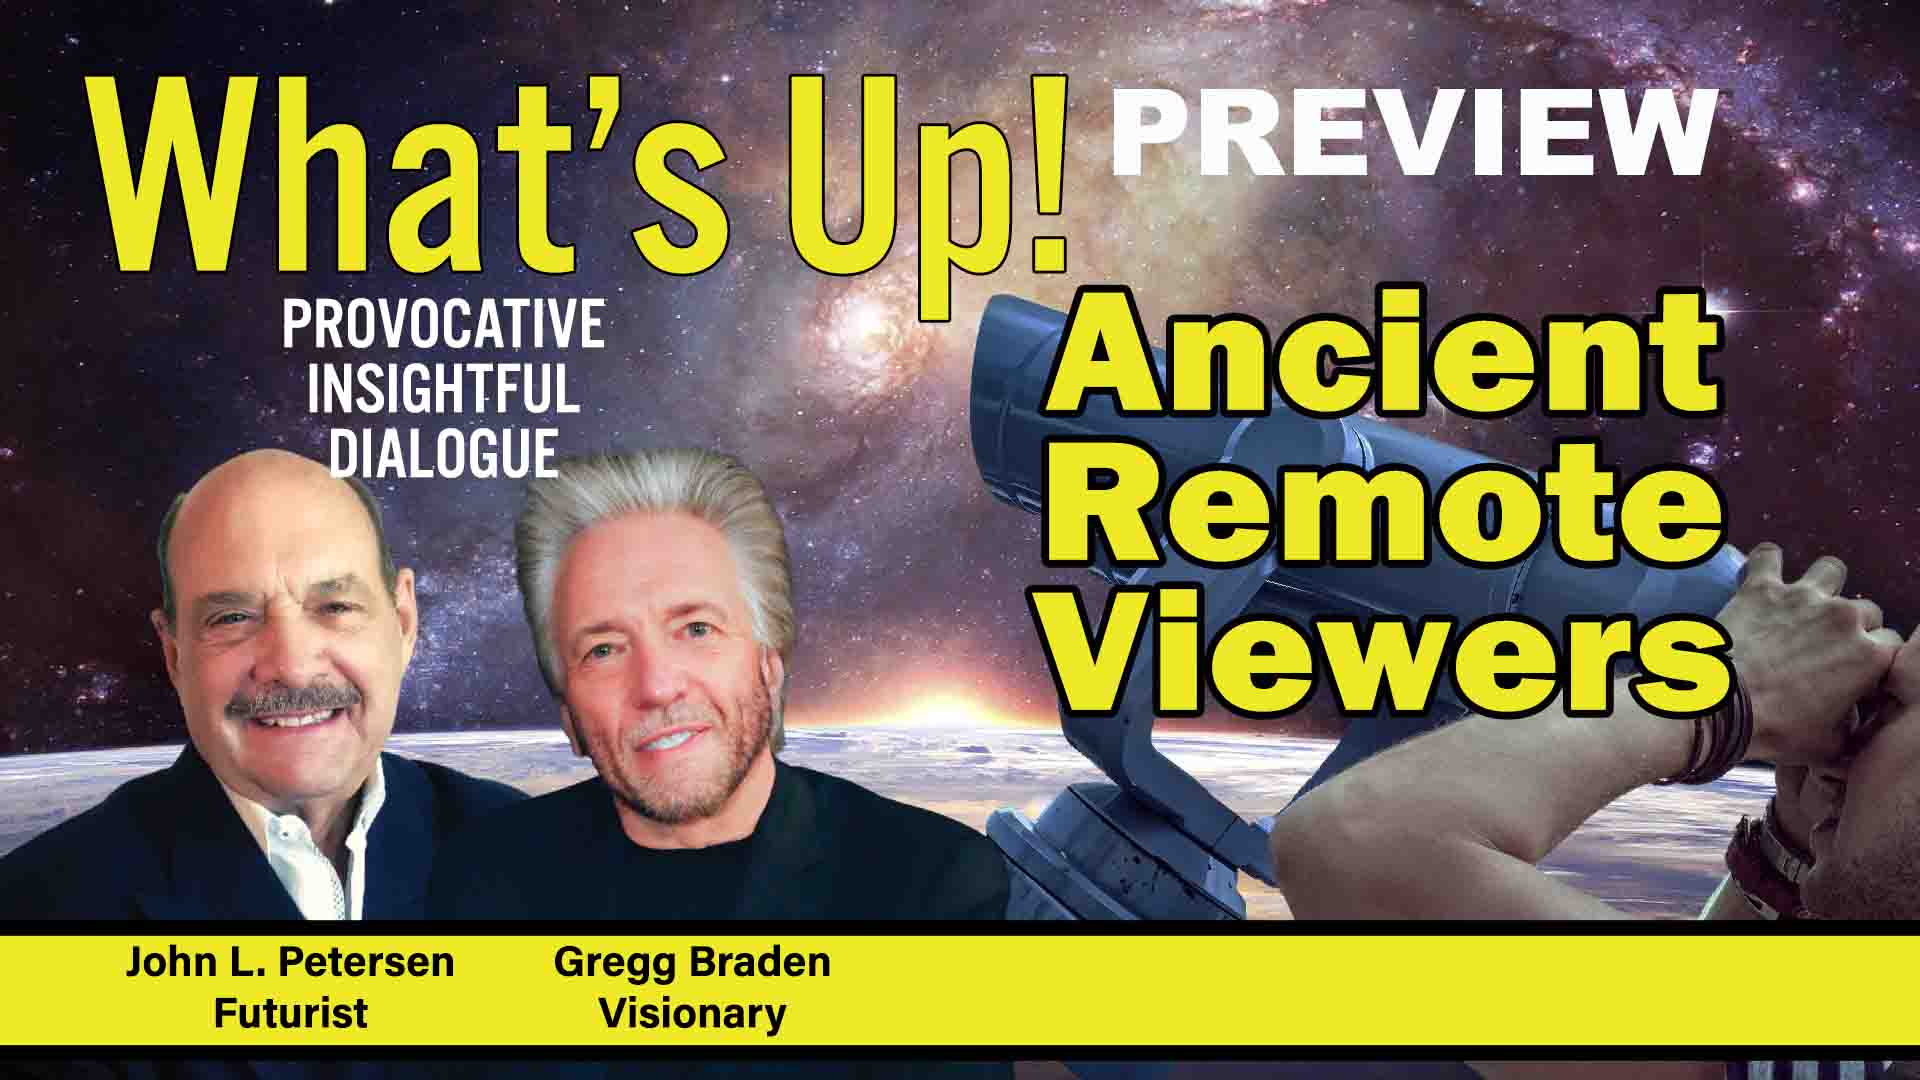 What's Up! Preview - Ancient Remote Viewers